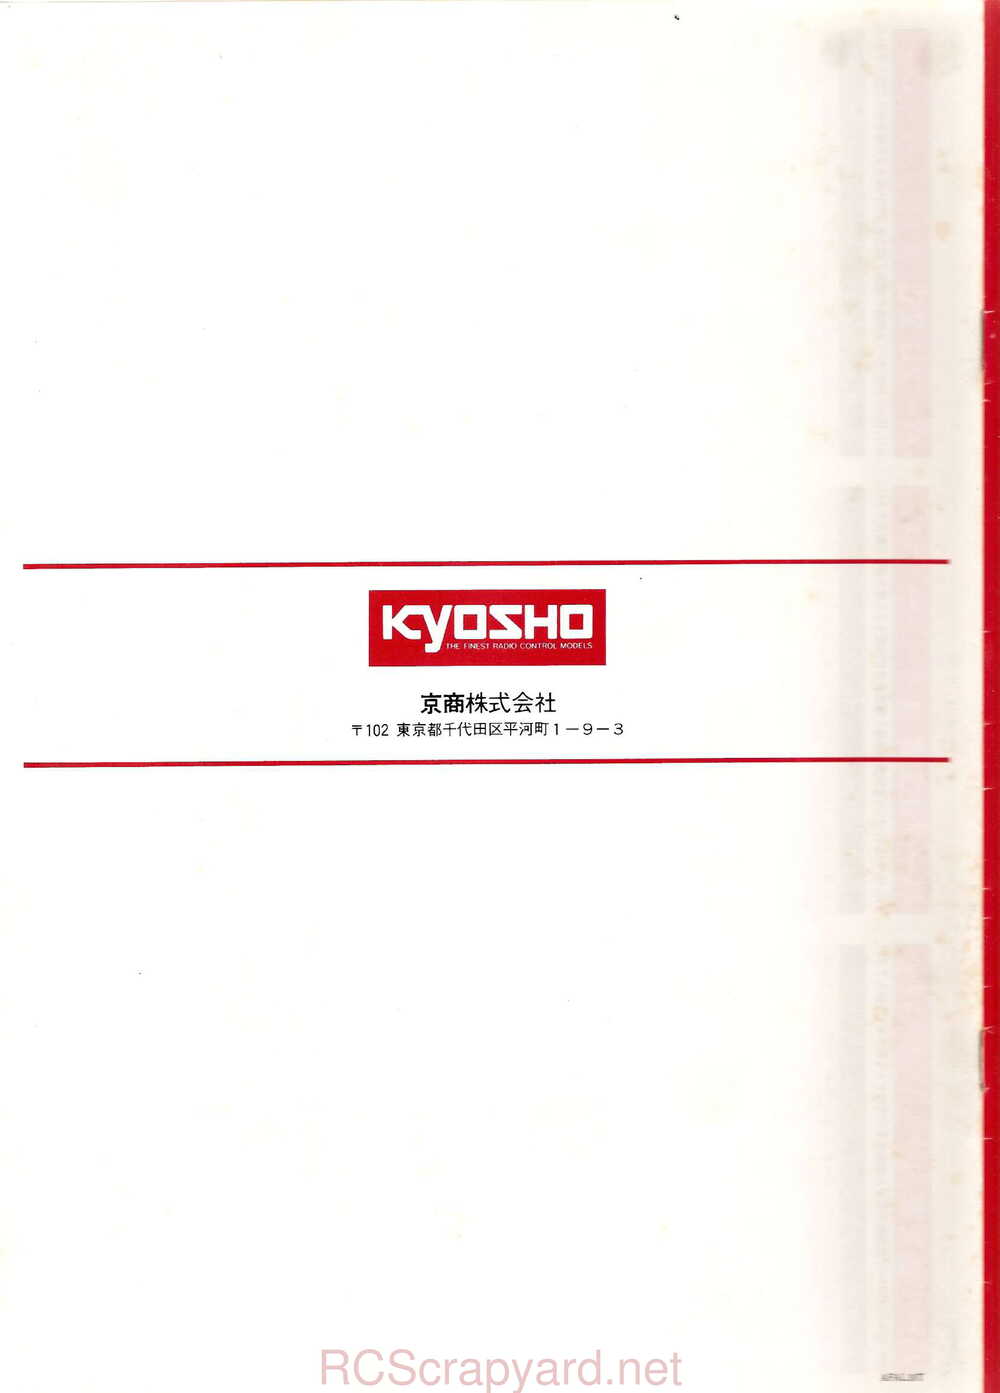 Kyosho - 3084 - Cosmo - Manual - Page 19